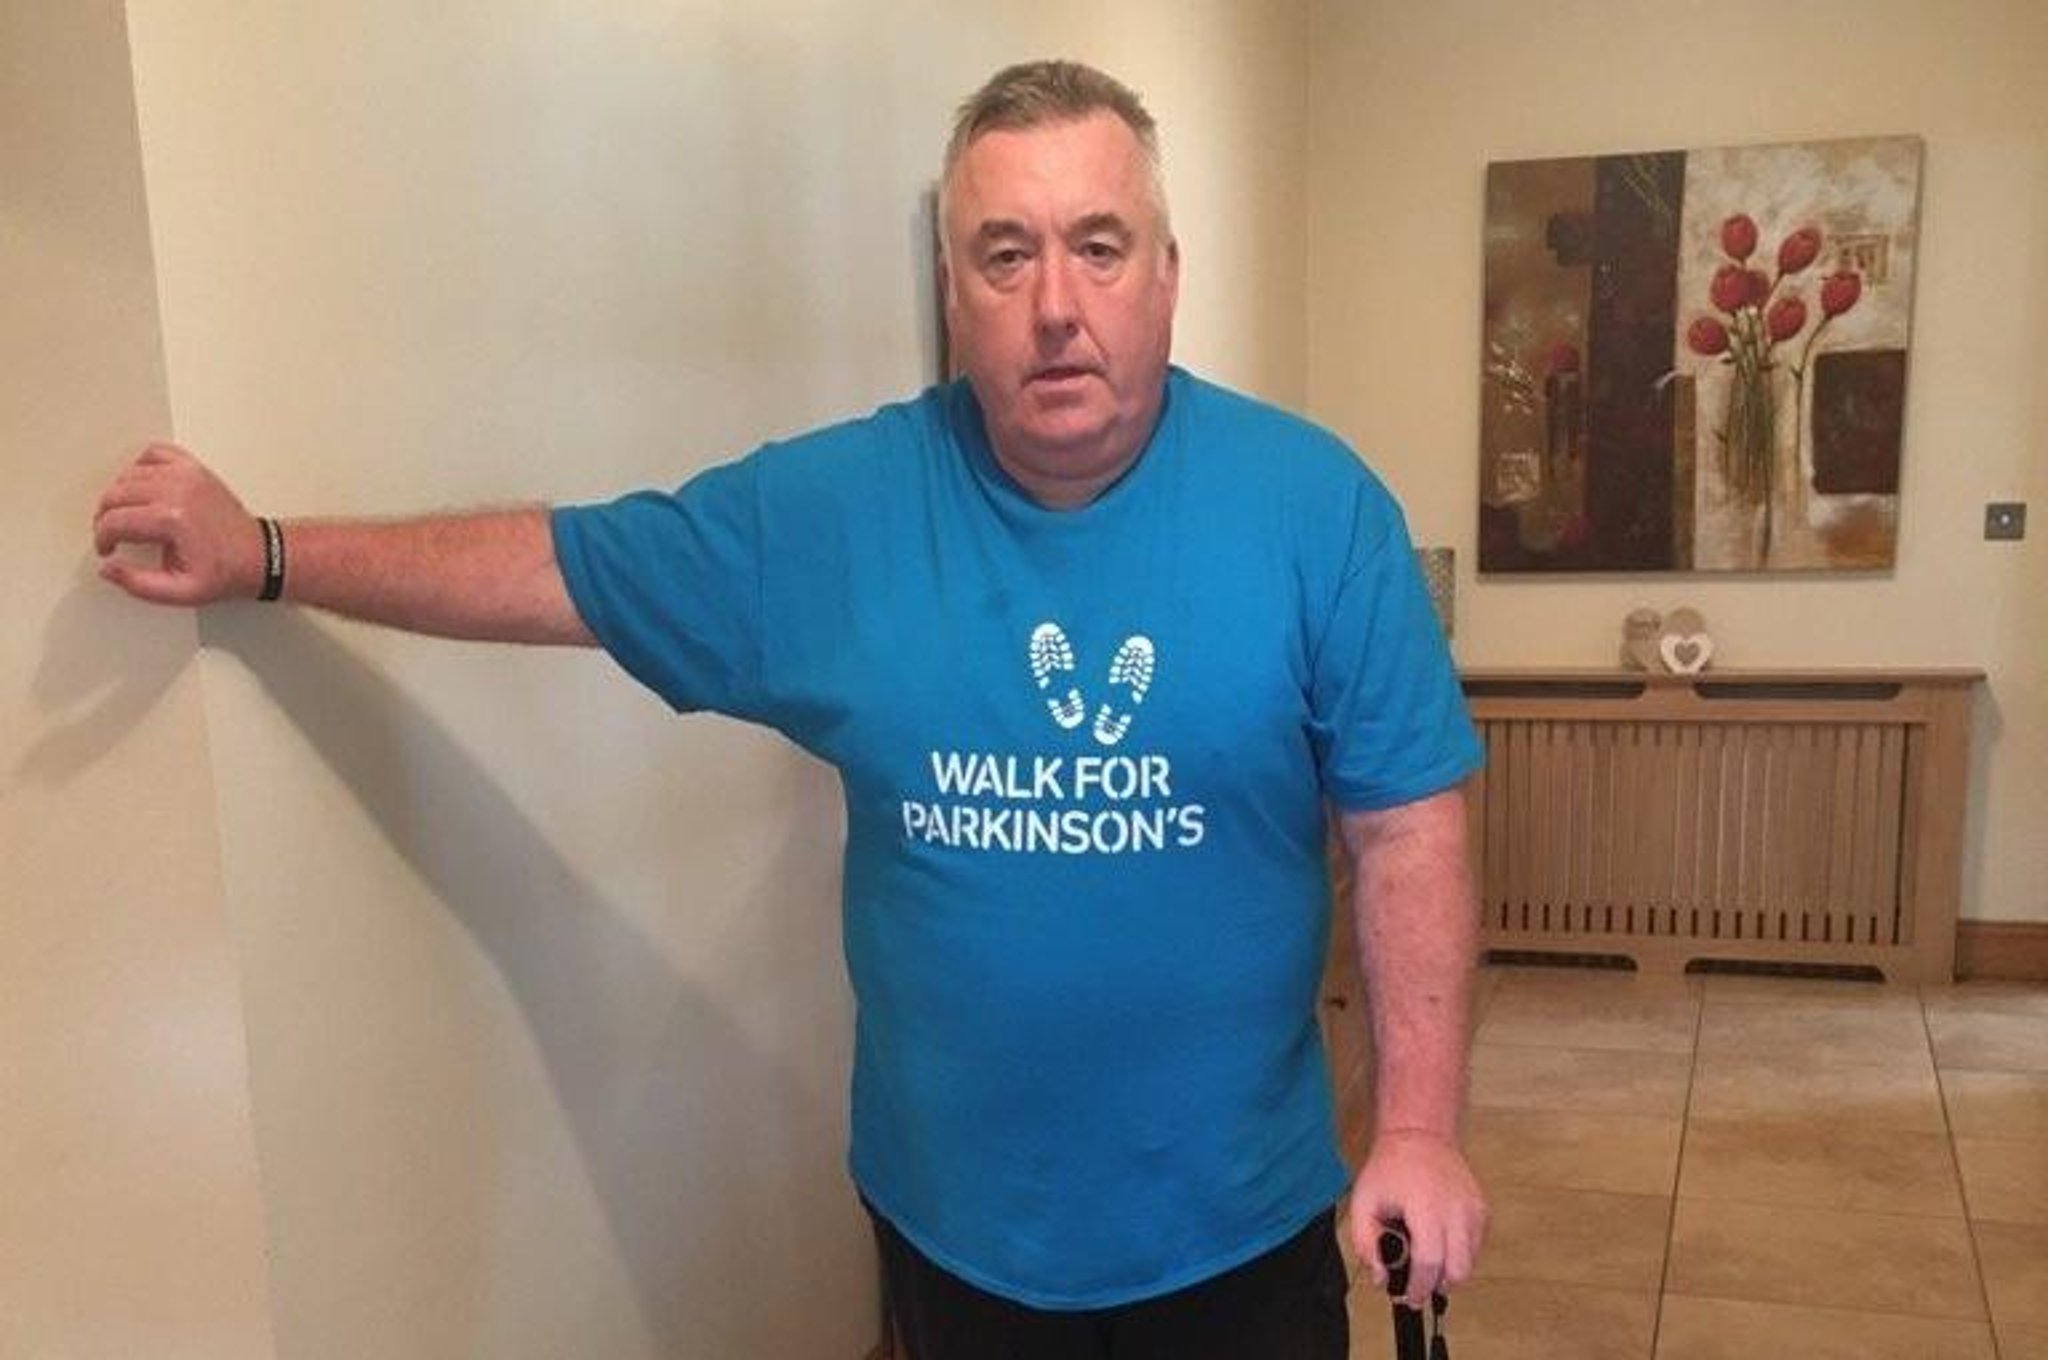 Lurgan man Robin McKeown on being initially told he had a drink problem, when in fact he had Parkinson's